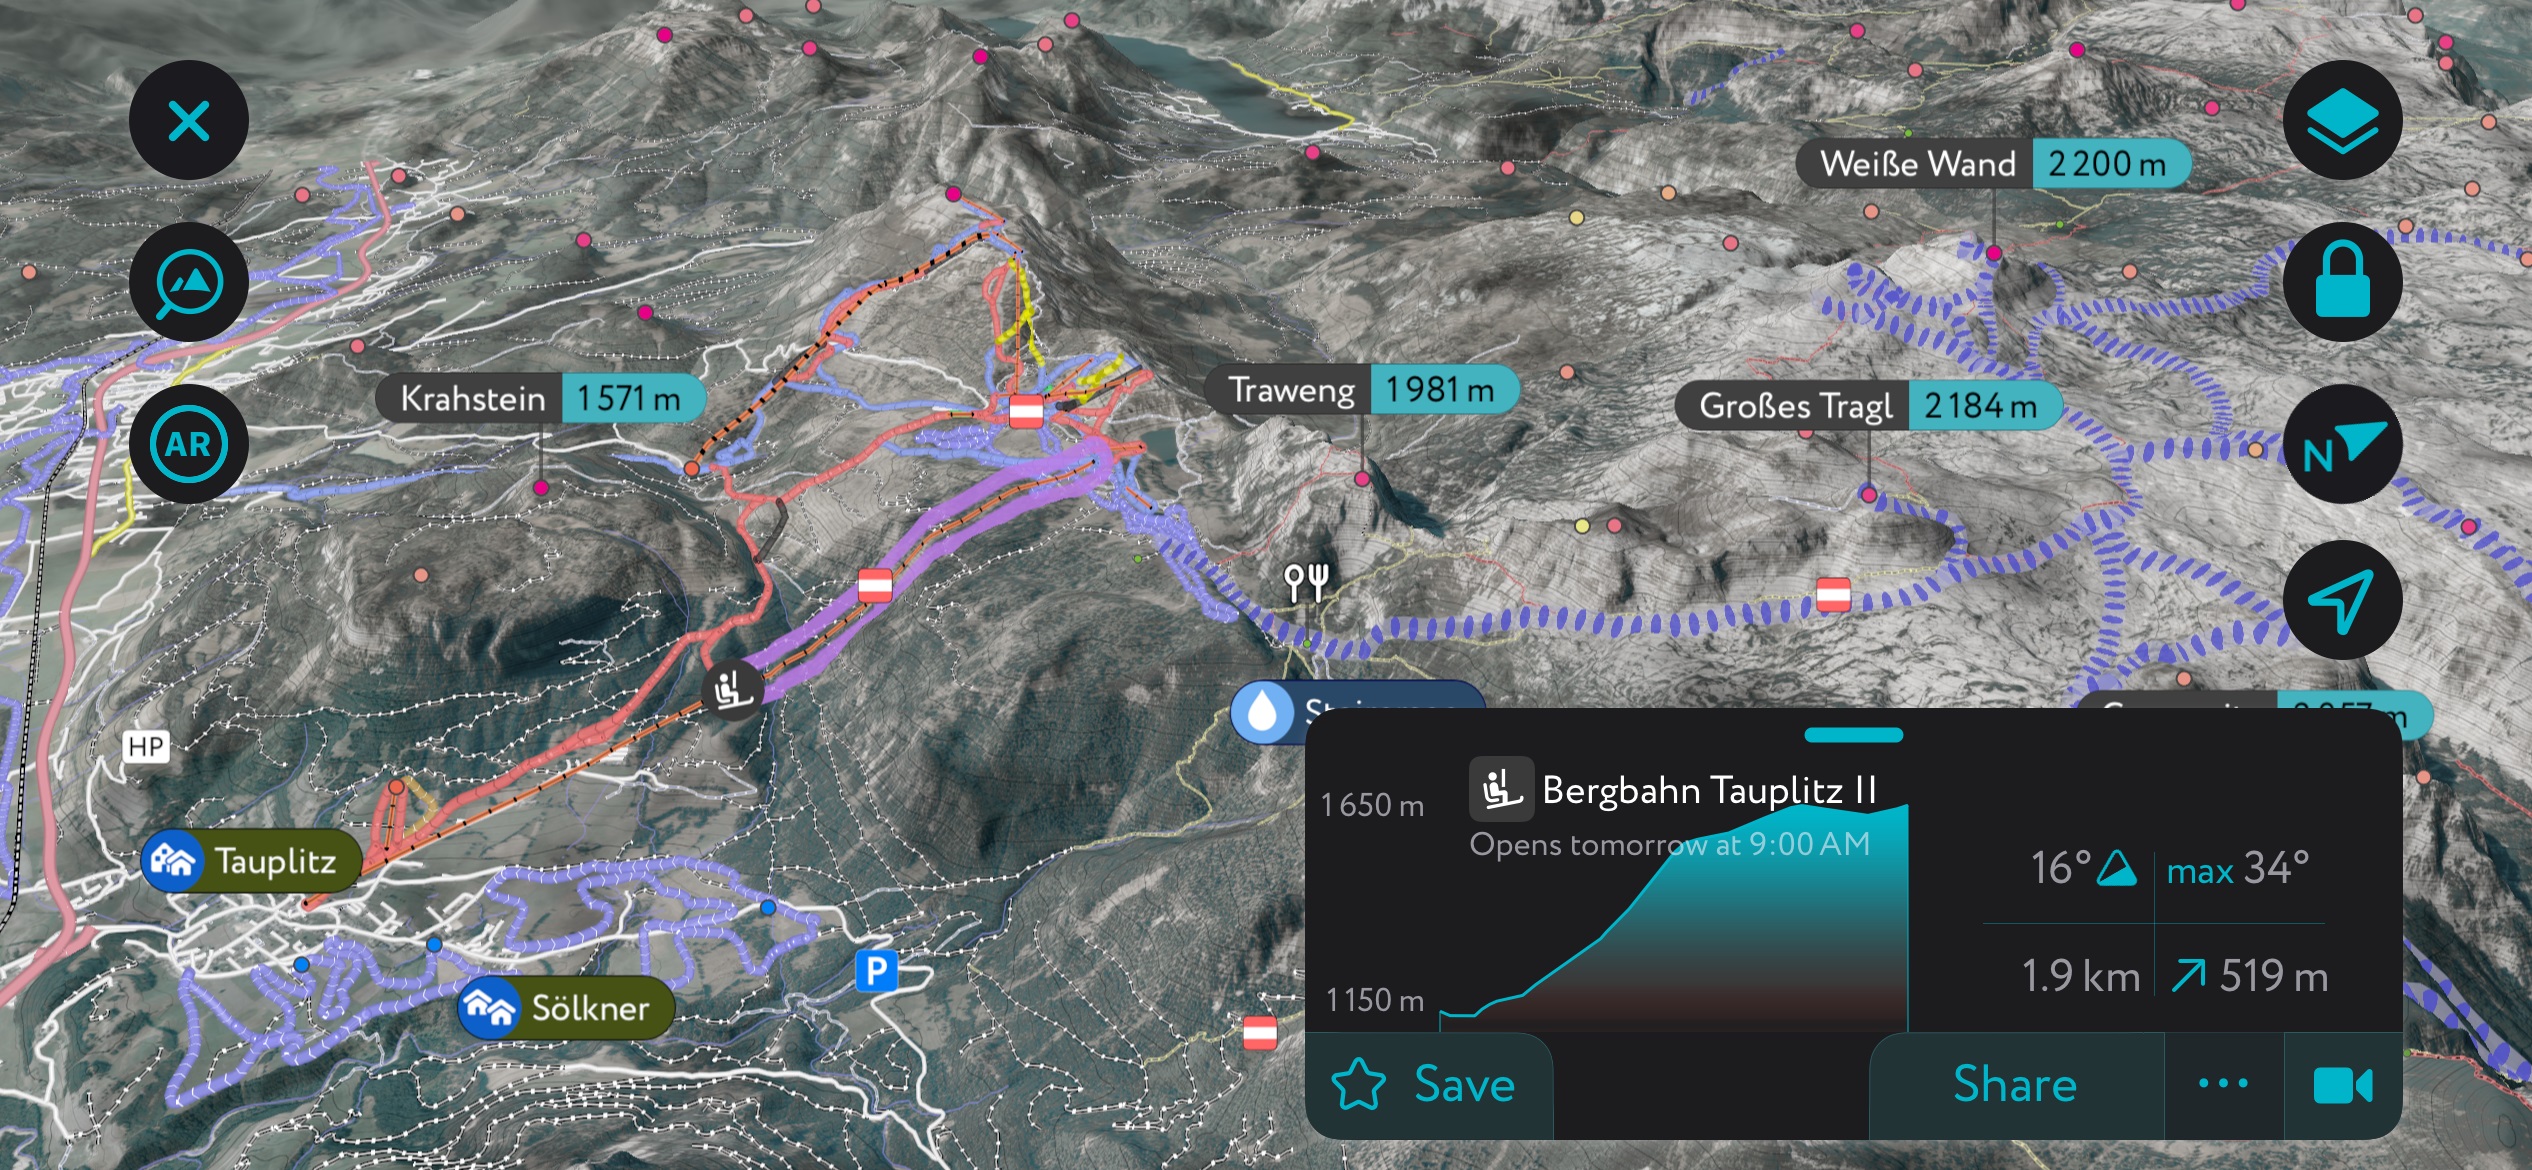 A generation of local hiking routes in the Totes Gebirge using PeakVisor’s mobile app. Totes Gebirge